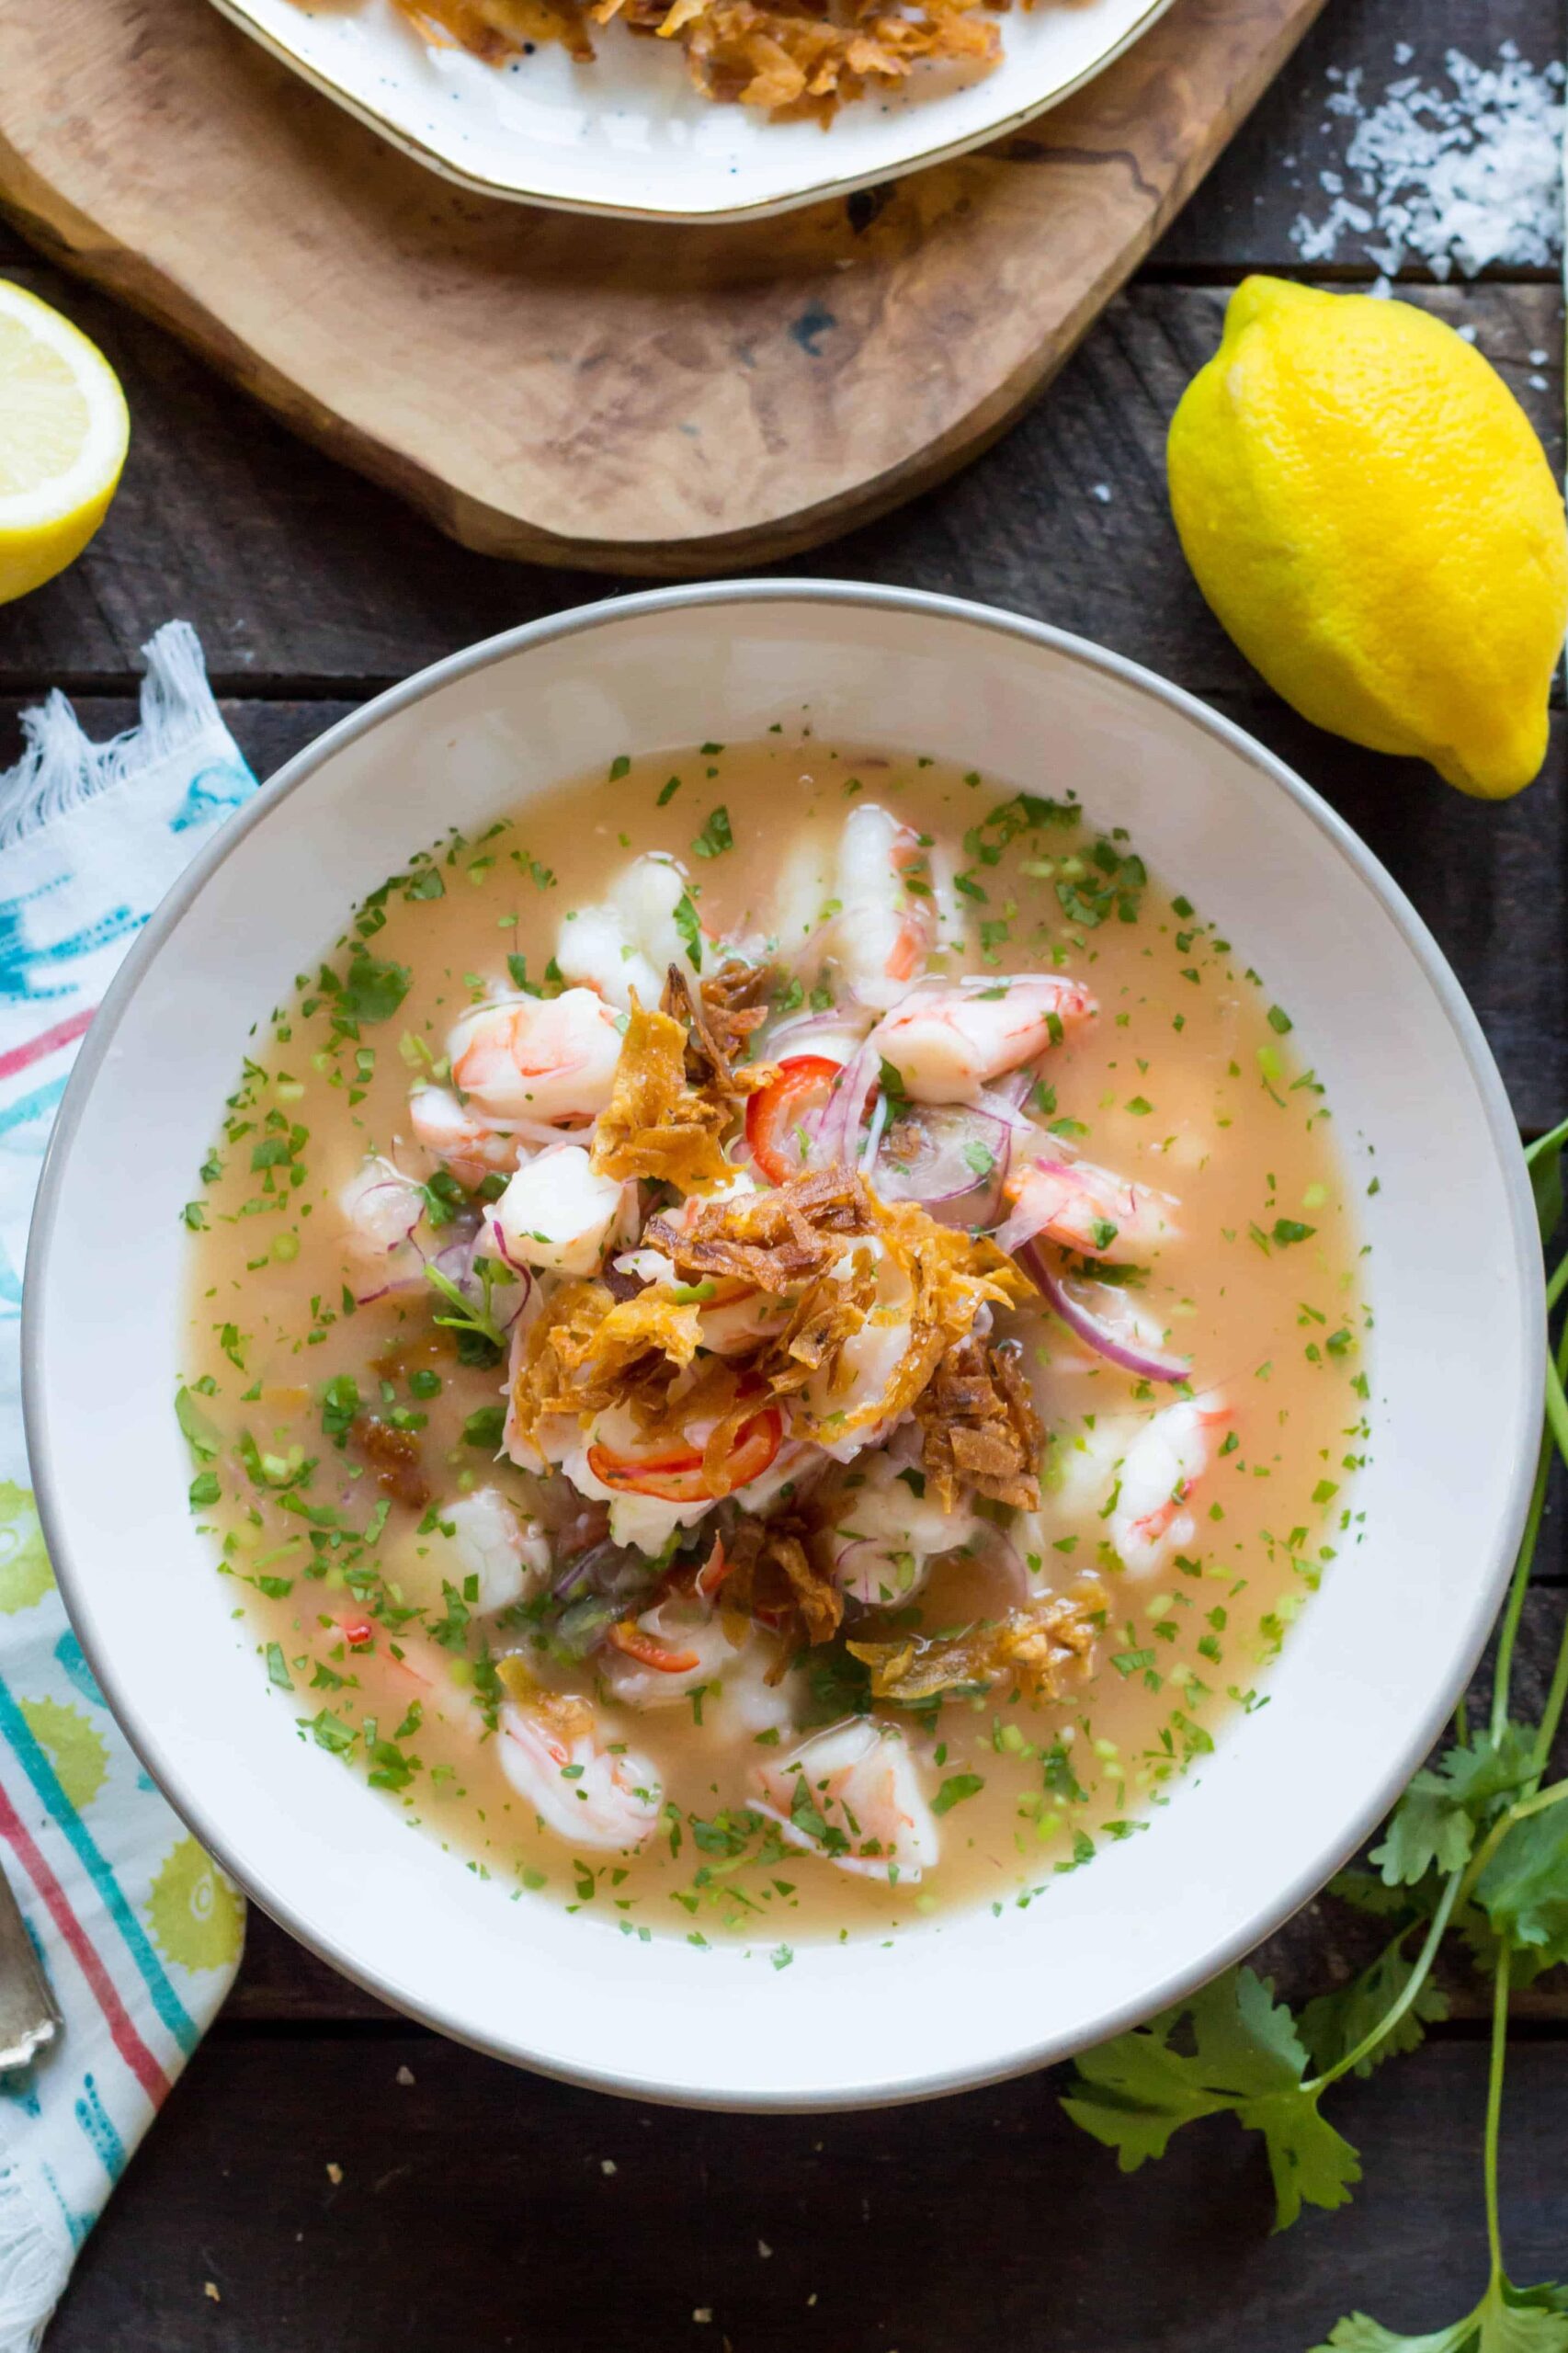  You won't be able to resist the bright and bold colors of this Ecuadorean ceviche dish.